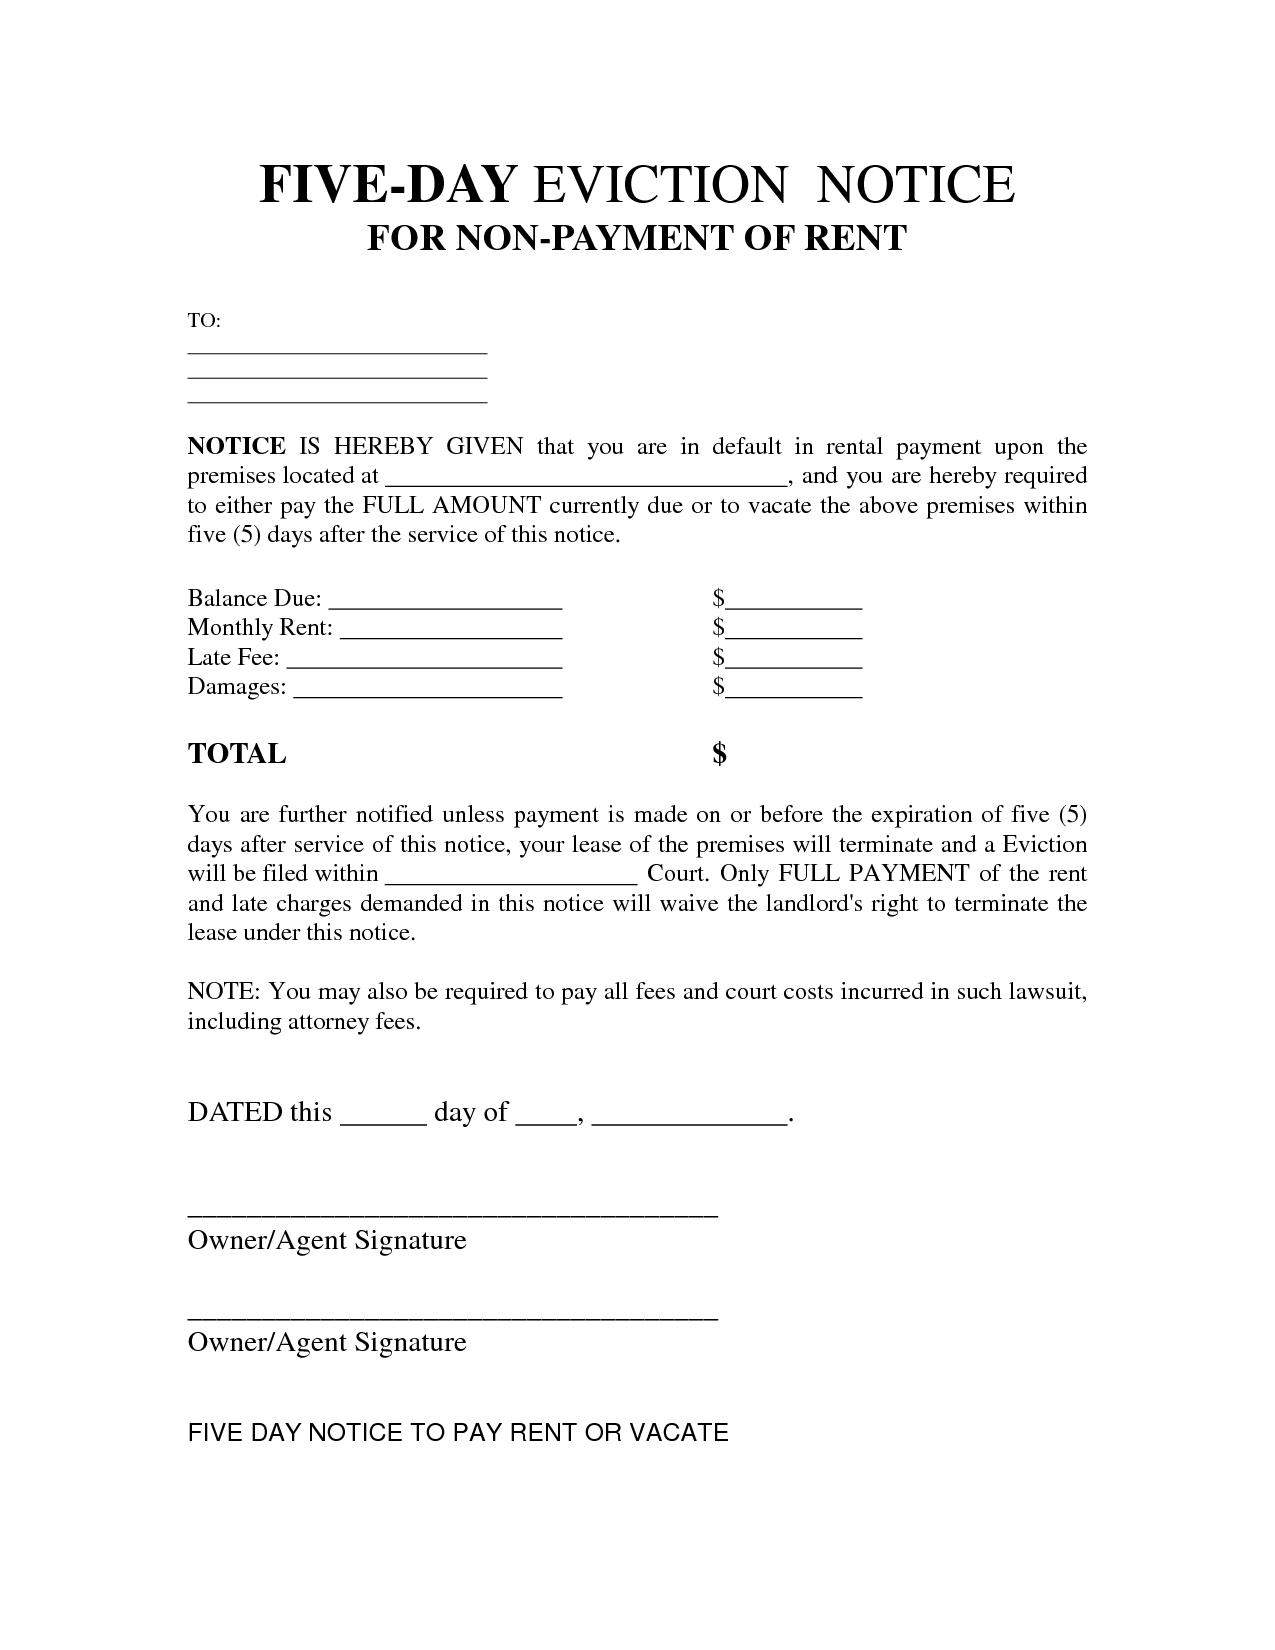 Free Printable Eviction Notice Letter | Bagnas - 5 Day Eviction - Free Printable 3 Day Eviction Notice